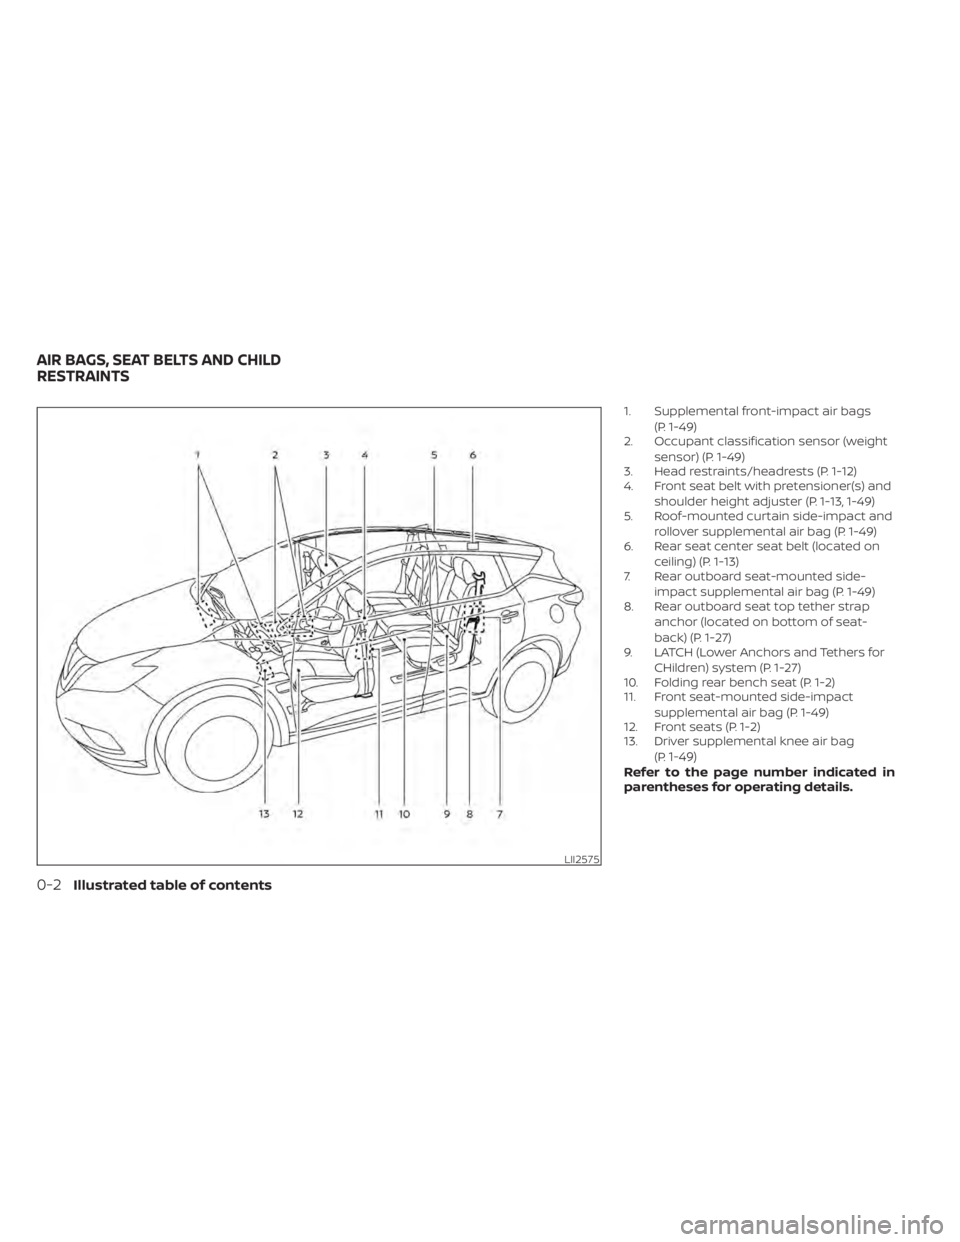 NISSAN MURANO 2020  Owner´s Manual 1. Supplemental front-impact air bags(P. 1-49)
2. Occupant classification sensor (weight
sensor) (P. 1-49)
3. Head restraints/headrests (P. 1-12)
4. Front seat belt with pretensioner(s) and
shoulder h